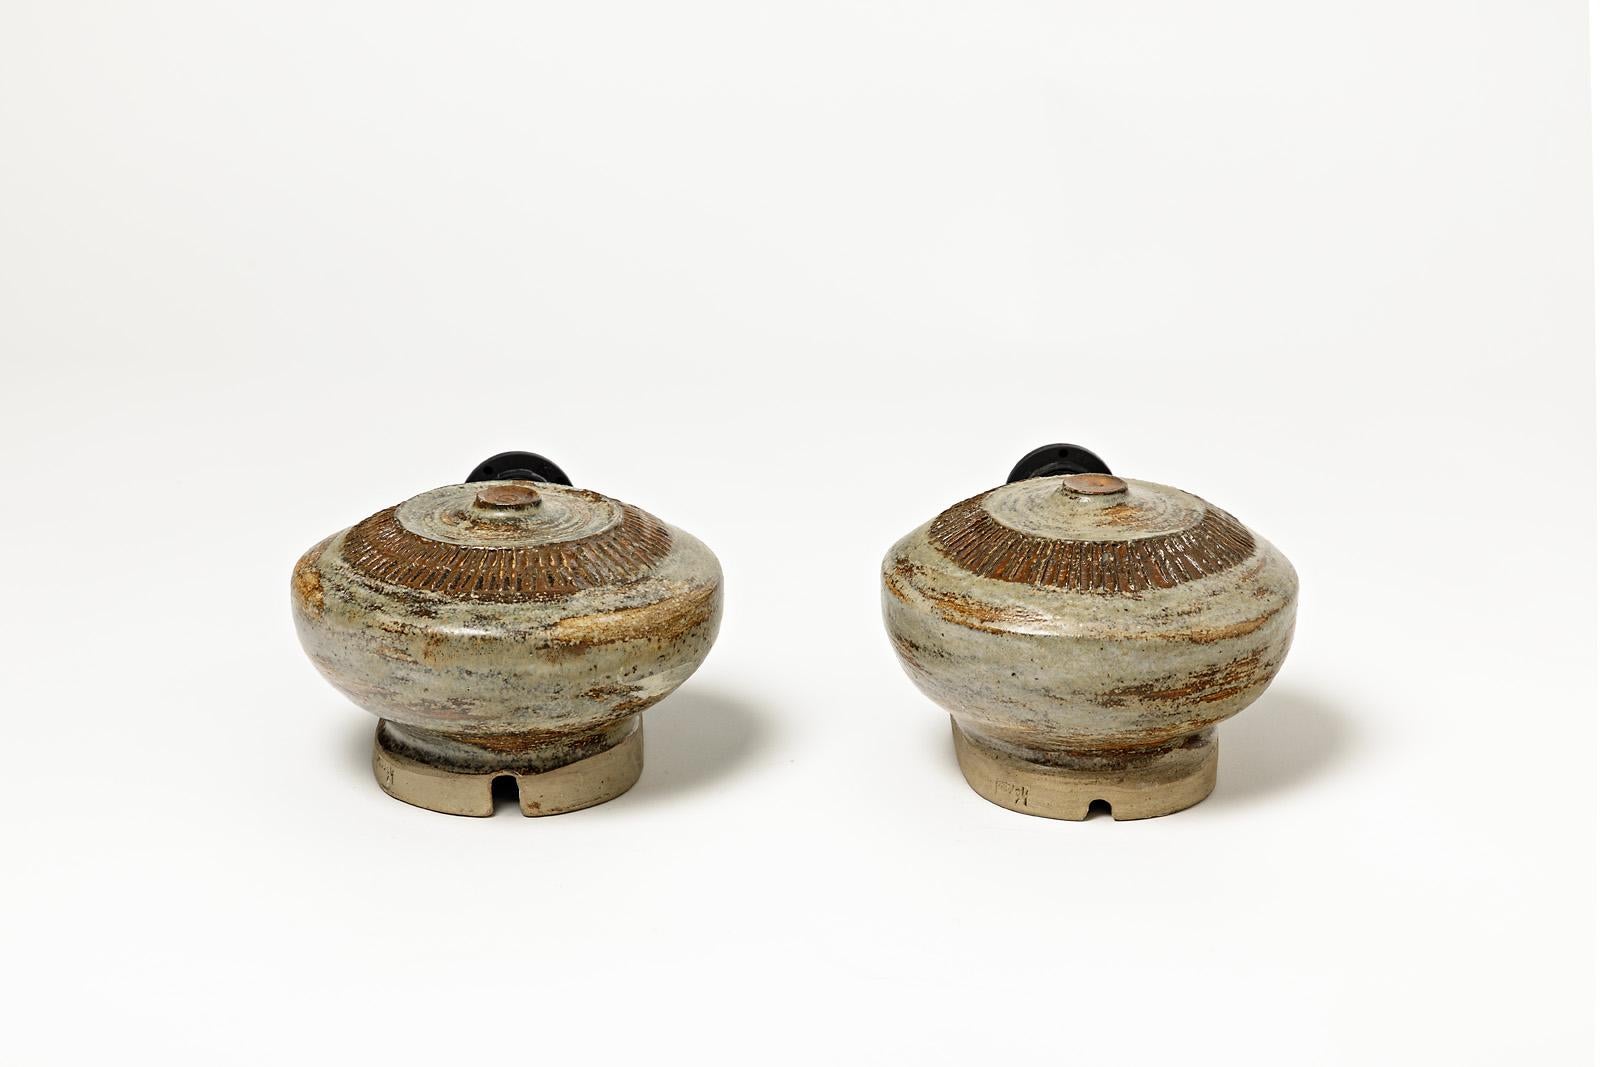 Pair of glazed ceramic wall lamps, green and brown by Robert Héraud.
Artist signature under the base. Circa 1960.

H : 7.1’ x 6’ x 3.9’ inches (ceramic only).
H : 9’4 x 6’ x 3.9’ inches (ceramic and electrical system).
Sold with a European